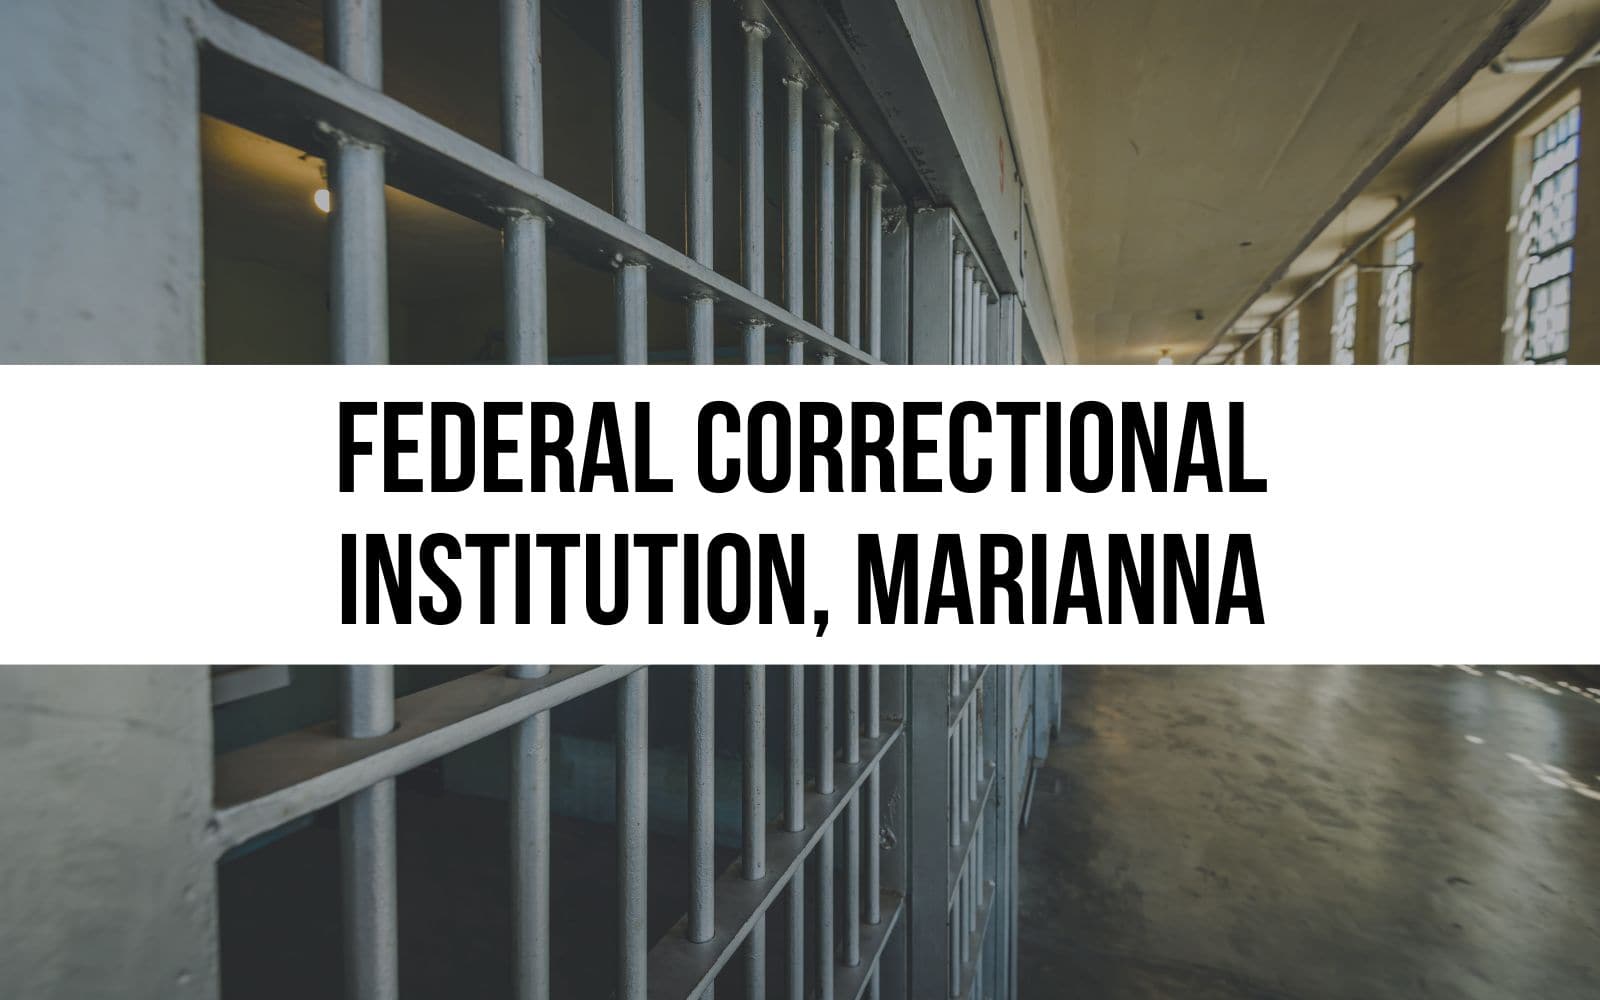 Federal Correctional Institution, Marianna